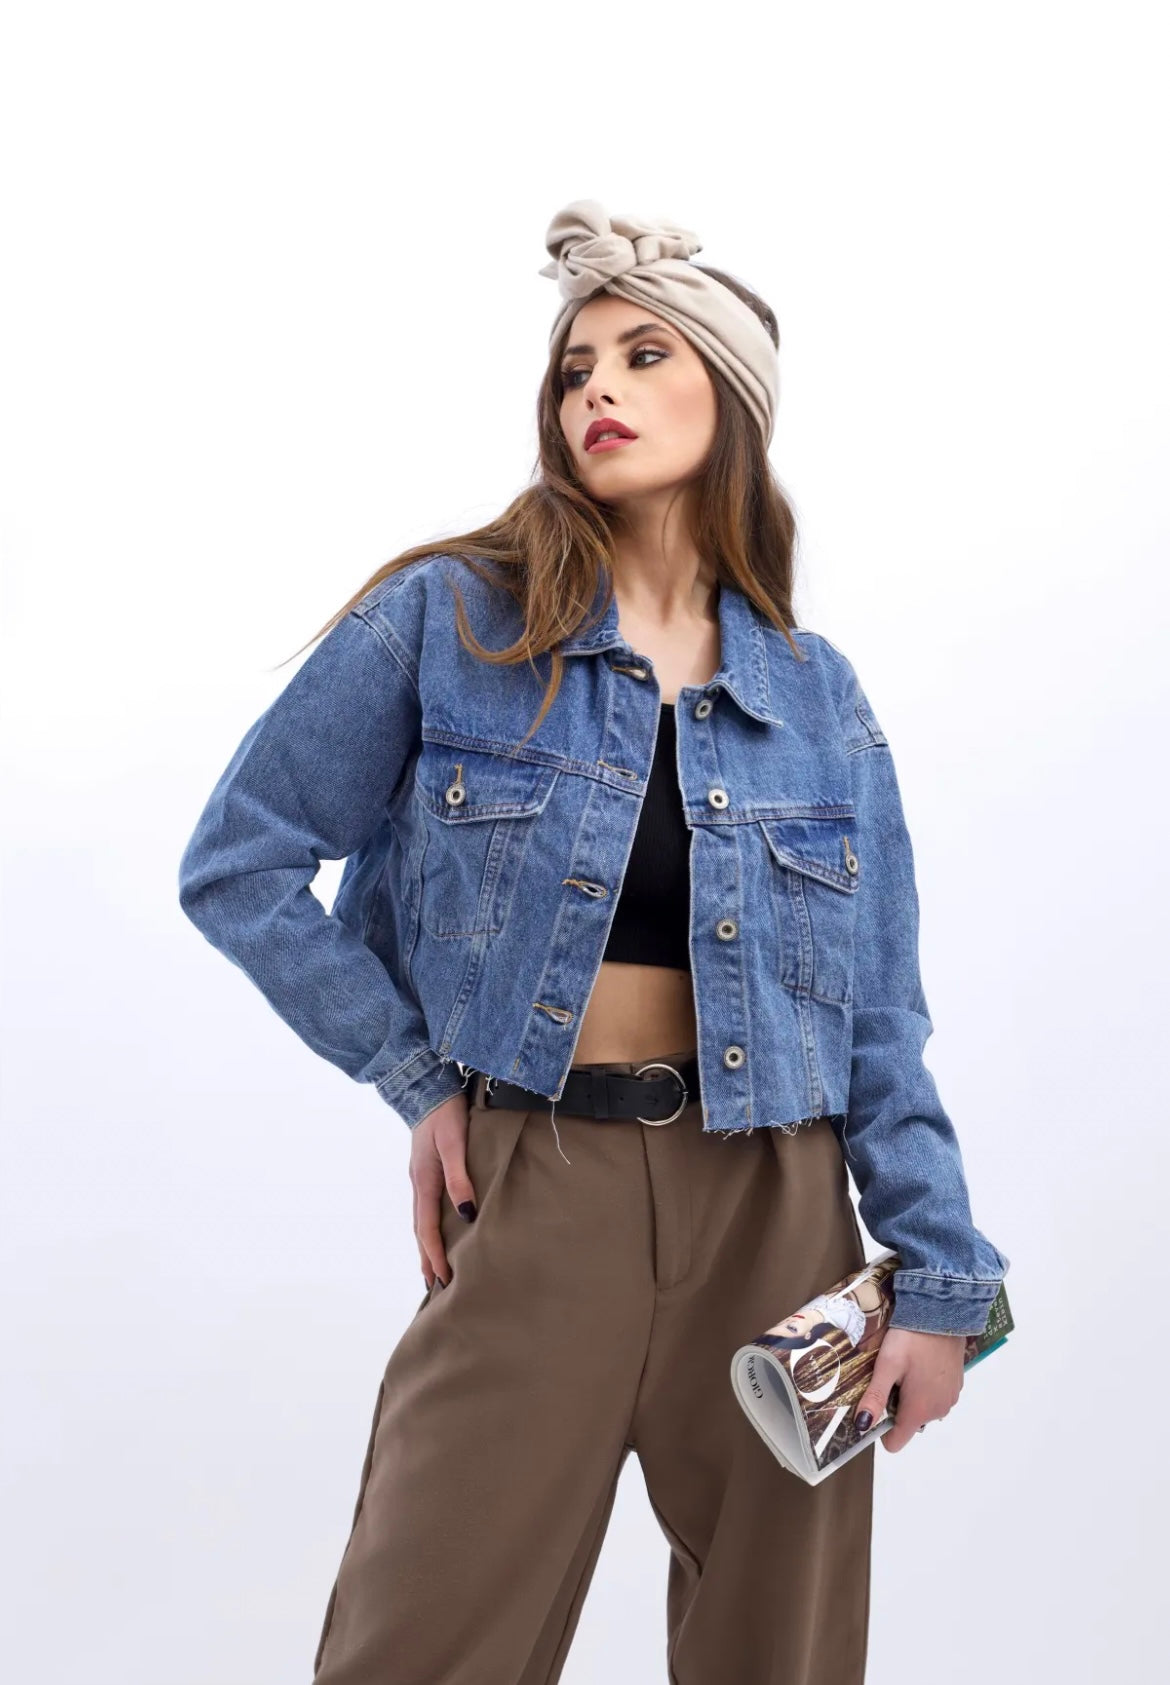 GIACCA IN JEANS MODELLO CROP